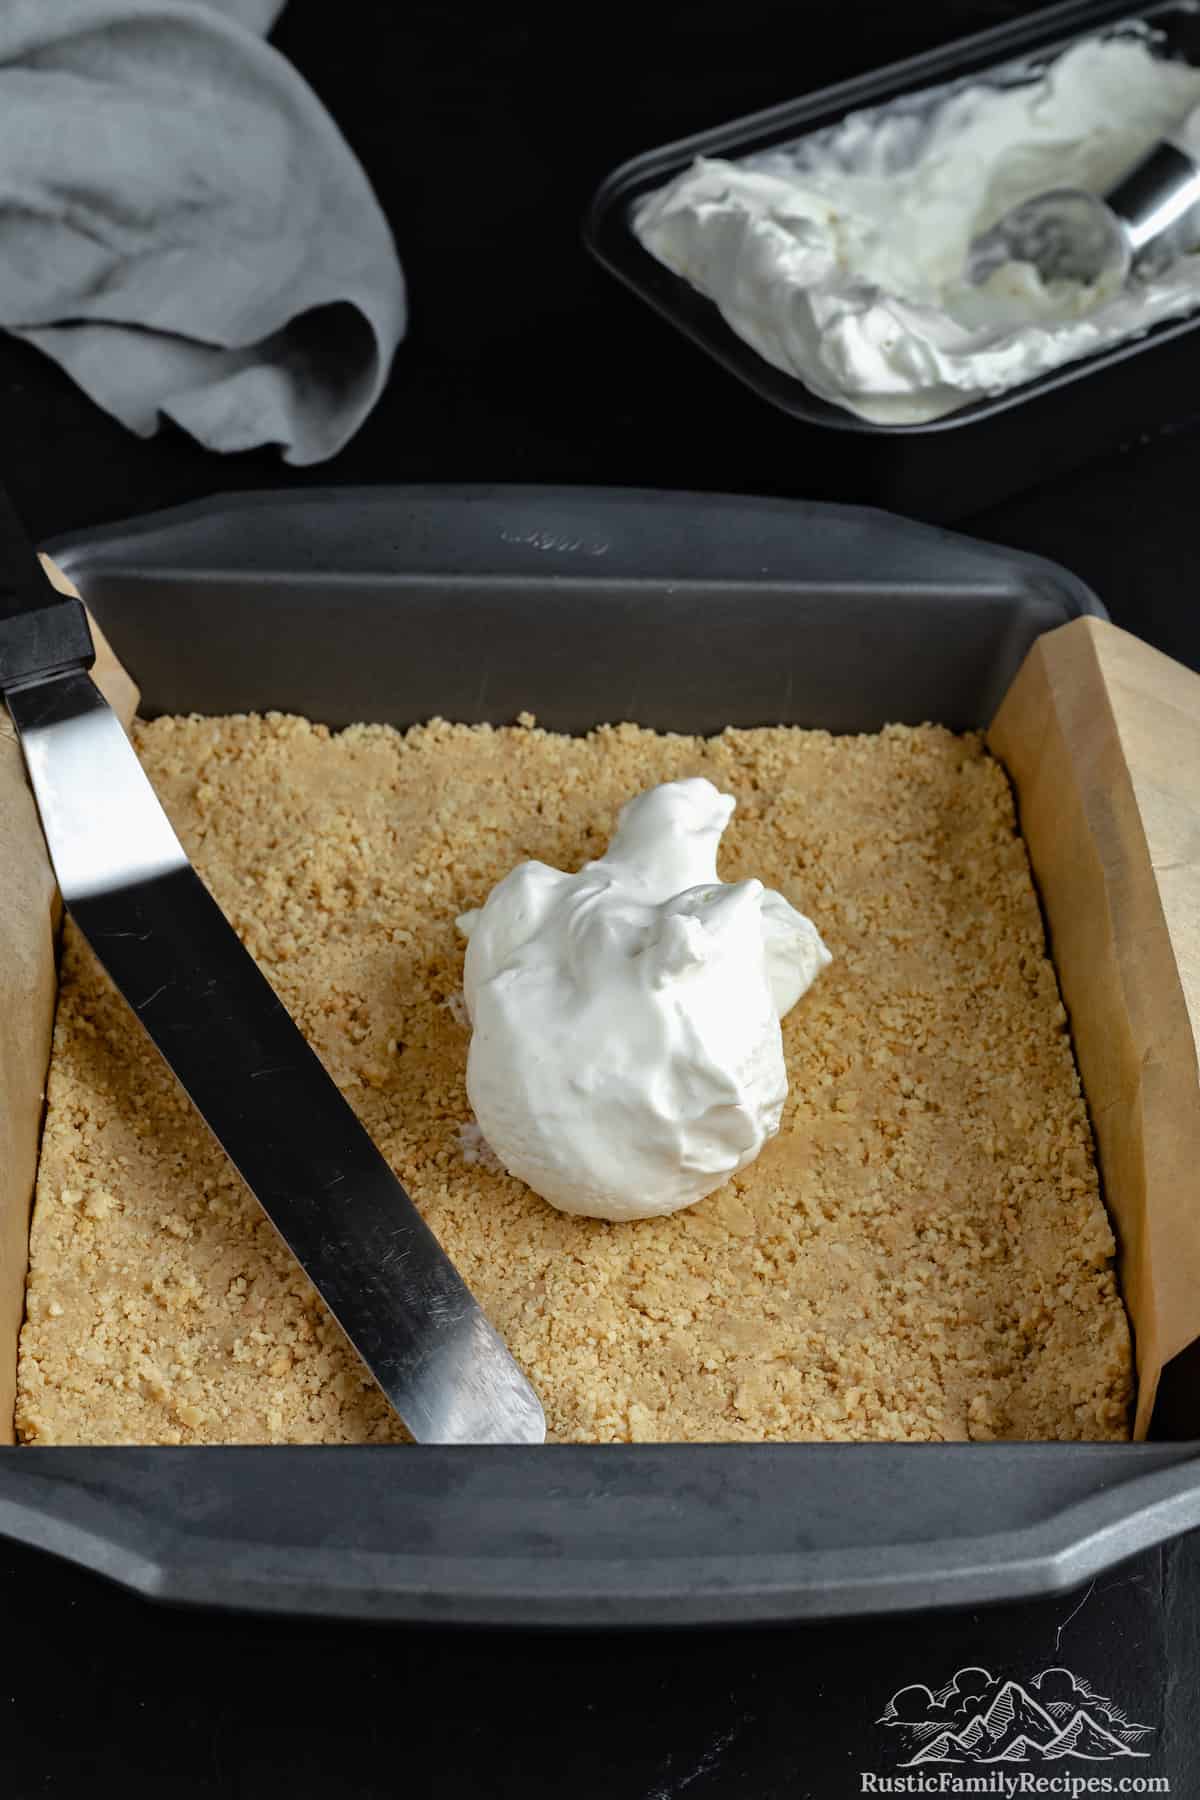 A scoop of vanilla ice cream is ready to be spread over the Golden Oreo crust that's been pressed into the bottom of a lined baking pan.